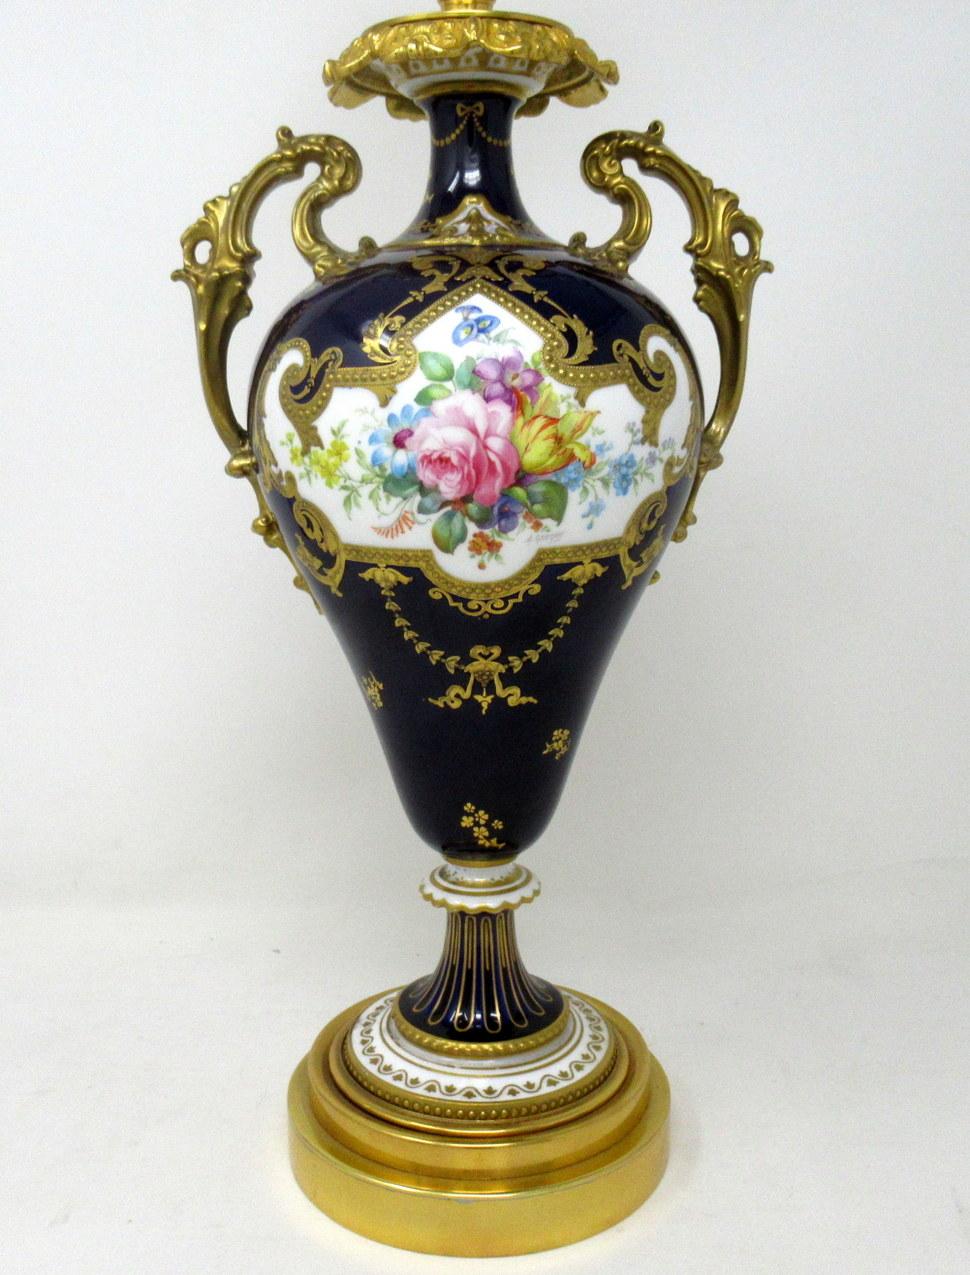 Stunning English Porcelain Royal Crown Derby twin handle hand decorated vase of ovoid outline and generous proportions, now converted to an Electric Table Lamp, painted by Albert Gregory, circa 1900.

The delicate twin handles, neck and foot with